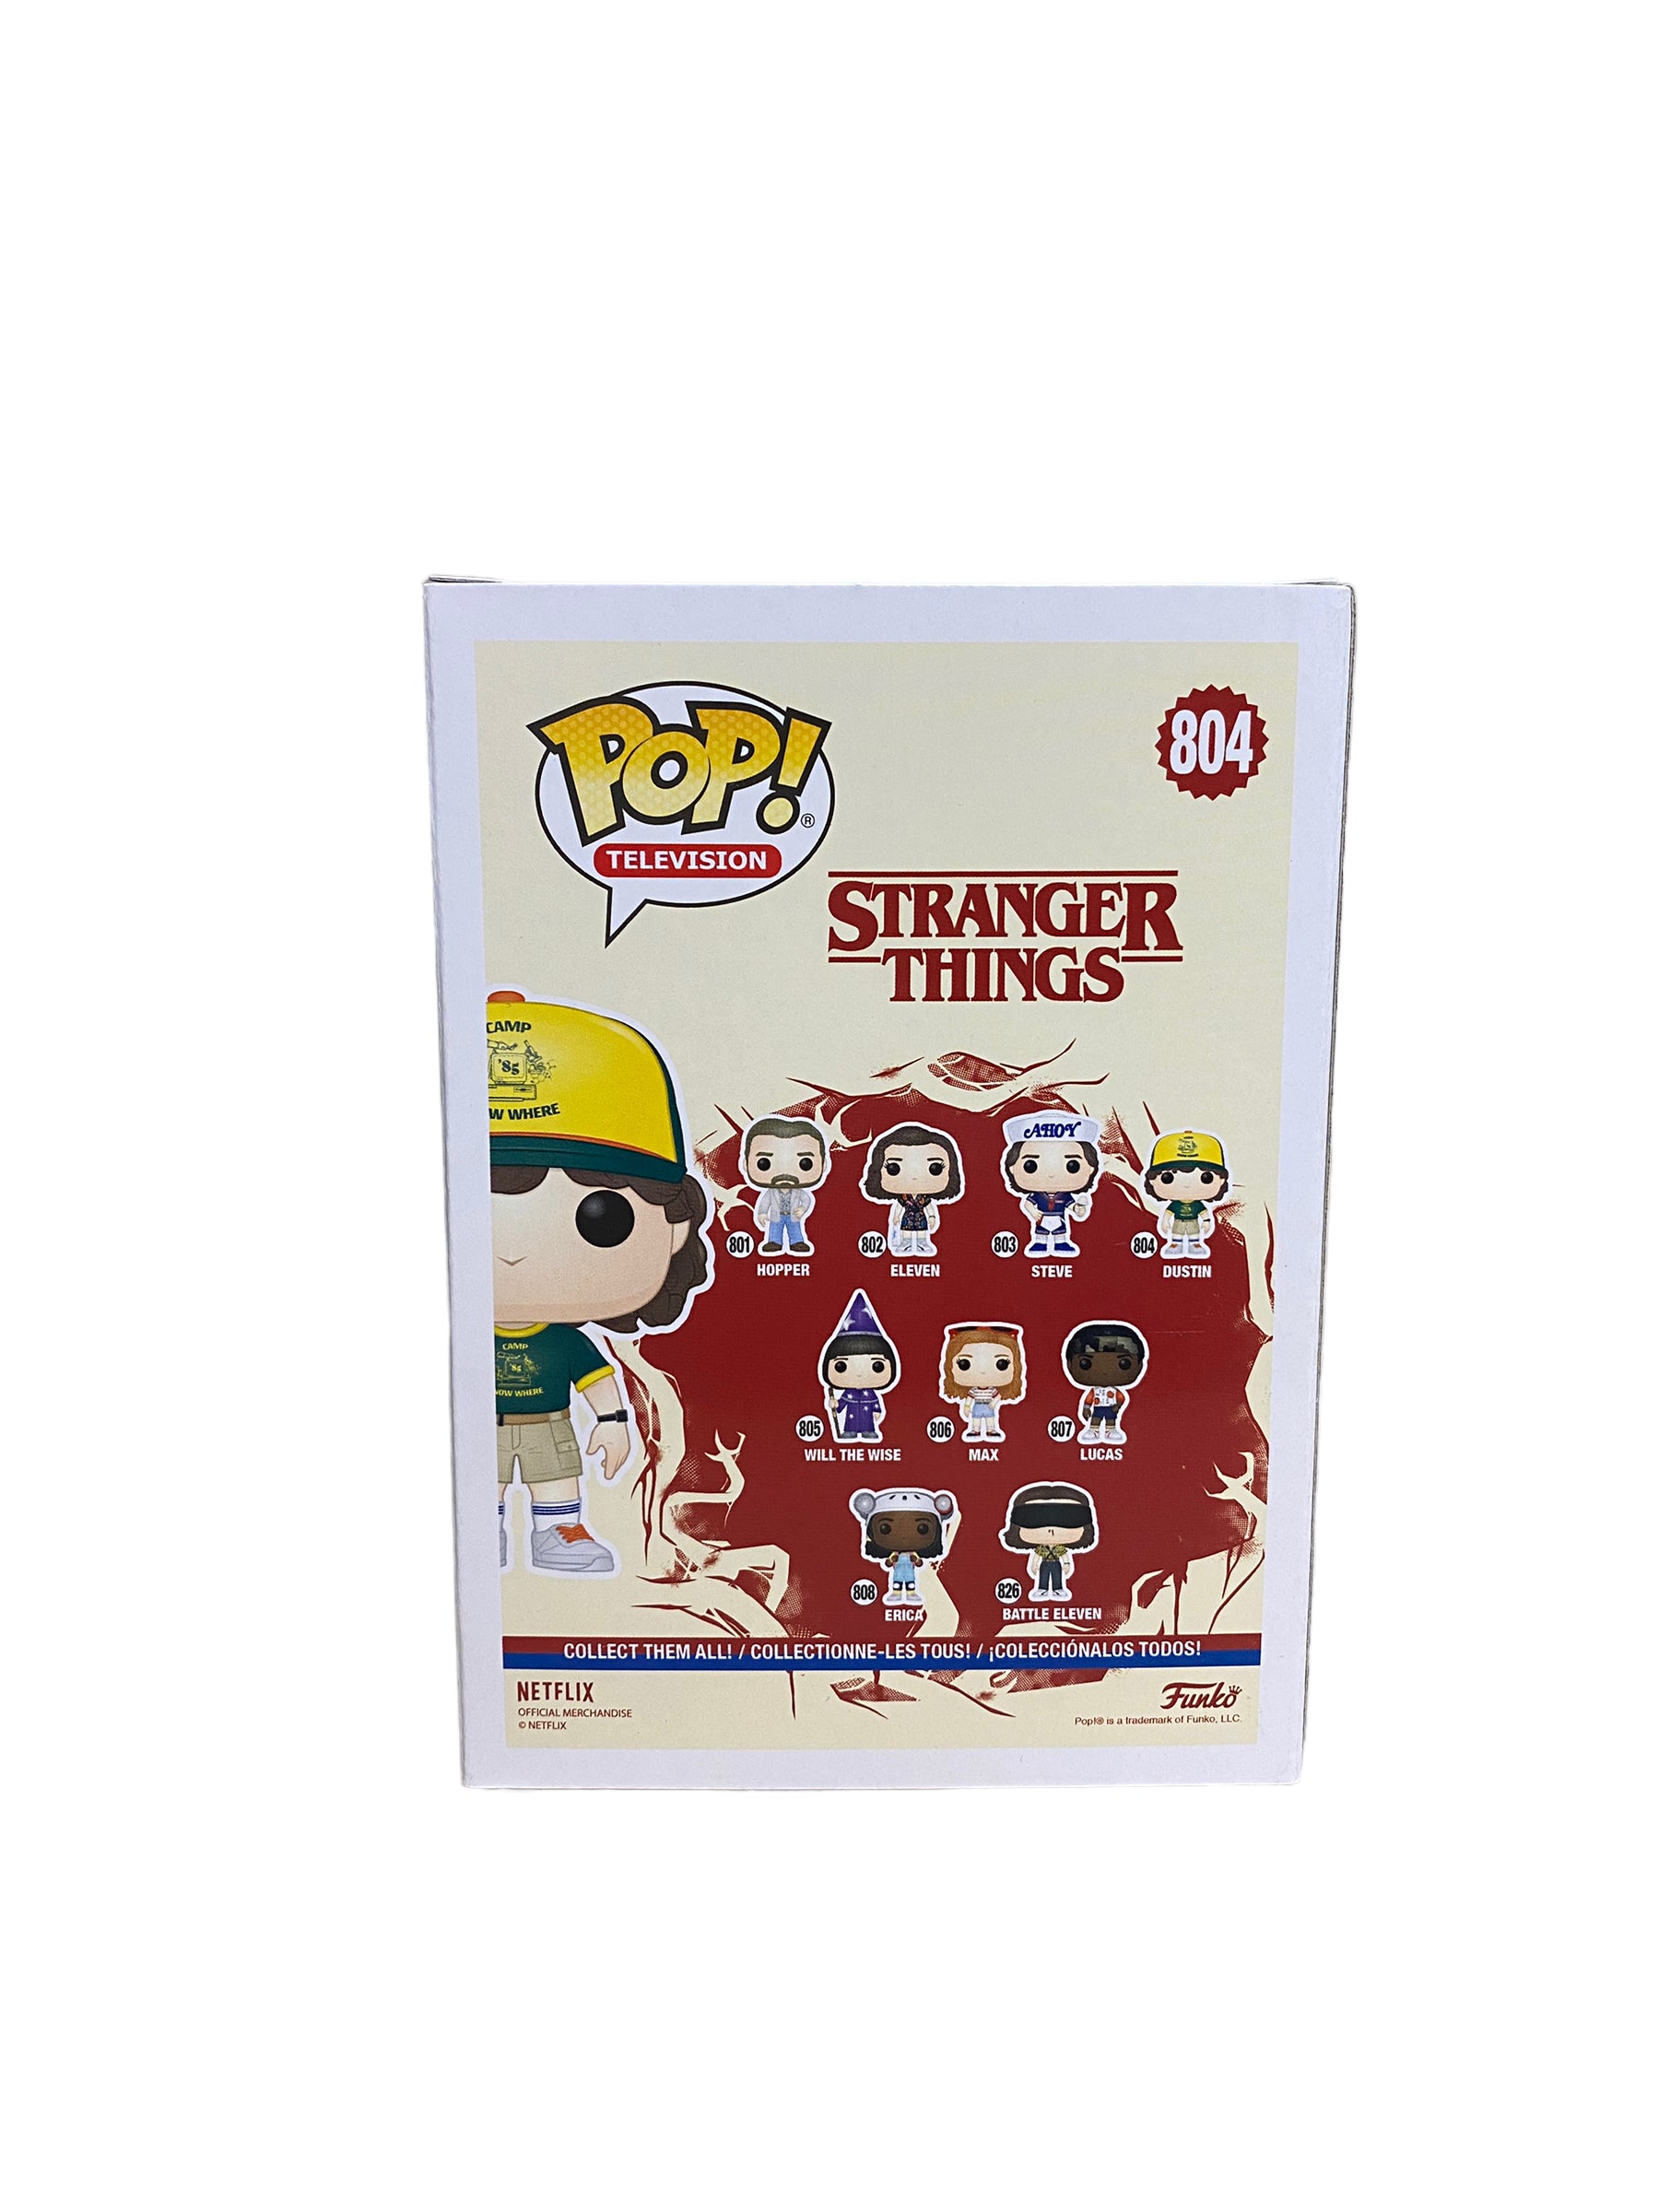 Dustin #804 (Camp, Gray) Funko Pop! - Stranger Things - Special Edition - Condition 8.5/10